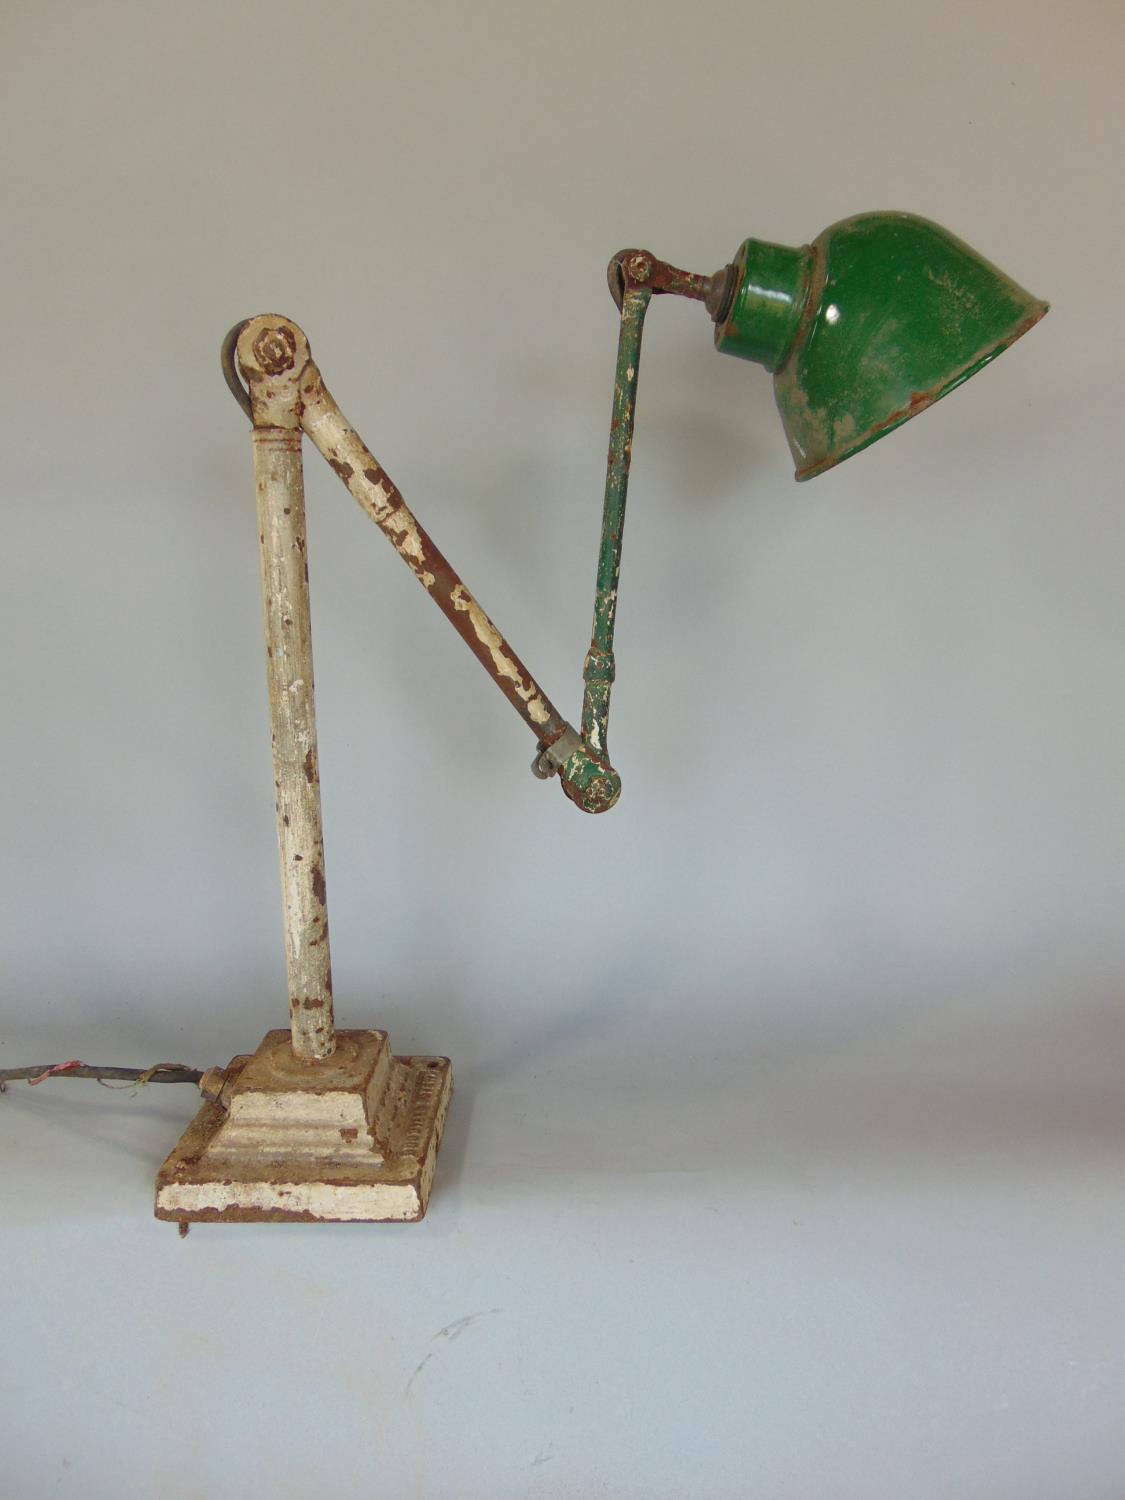 A Dugill's Patent Industrial iron work adjustable bench lamp with green enamel shade